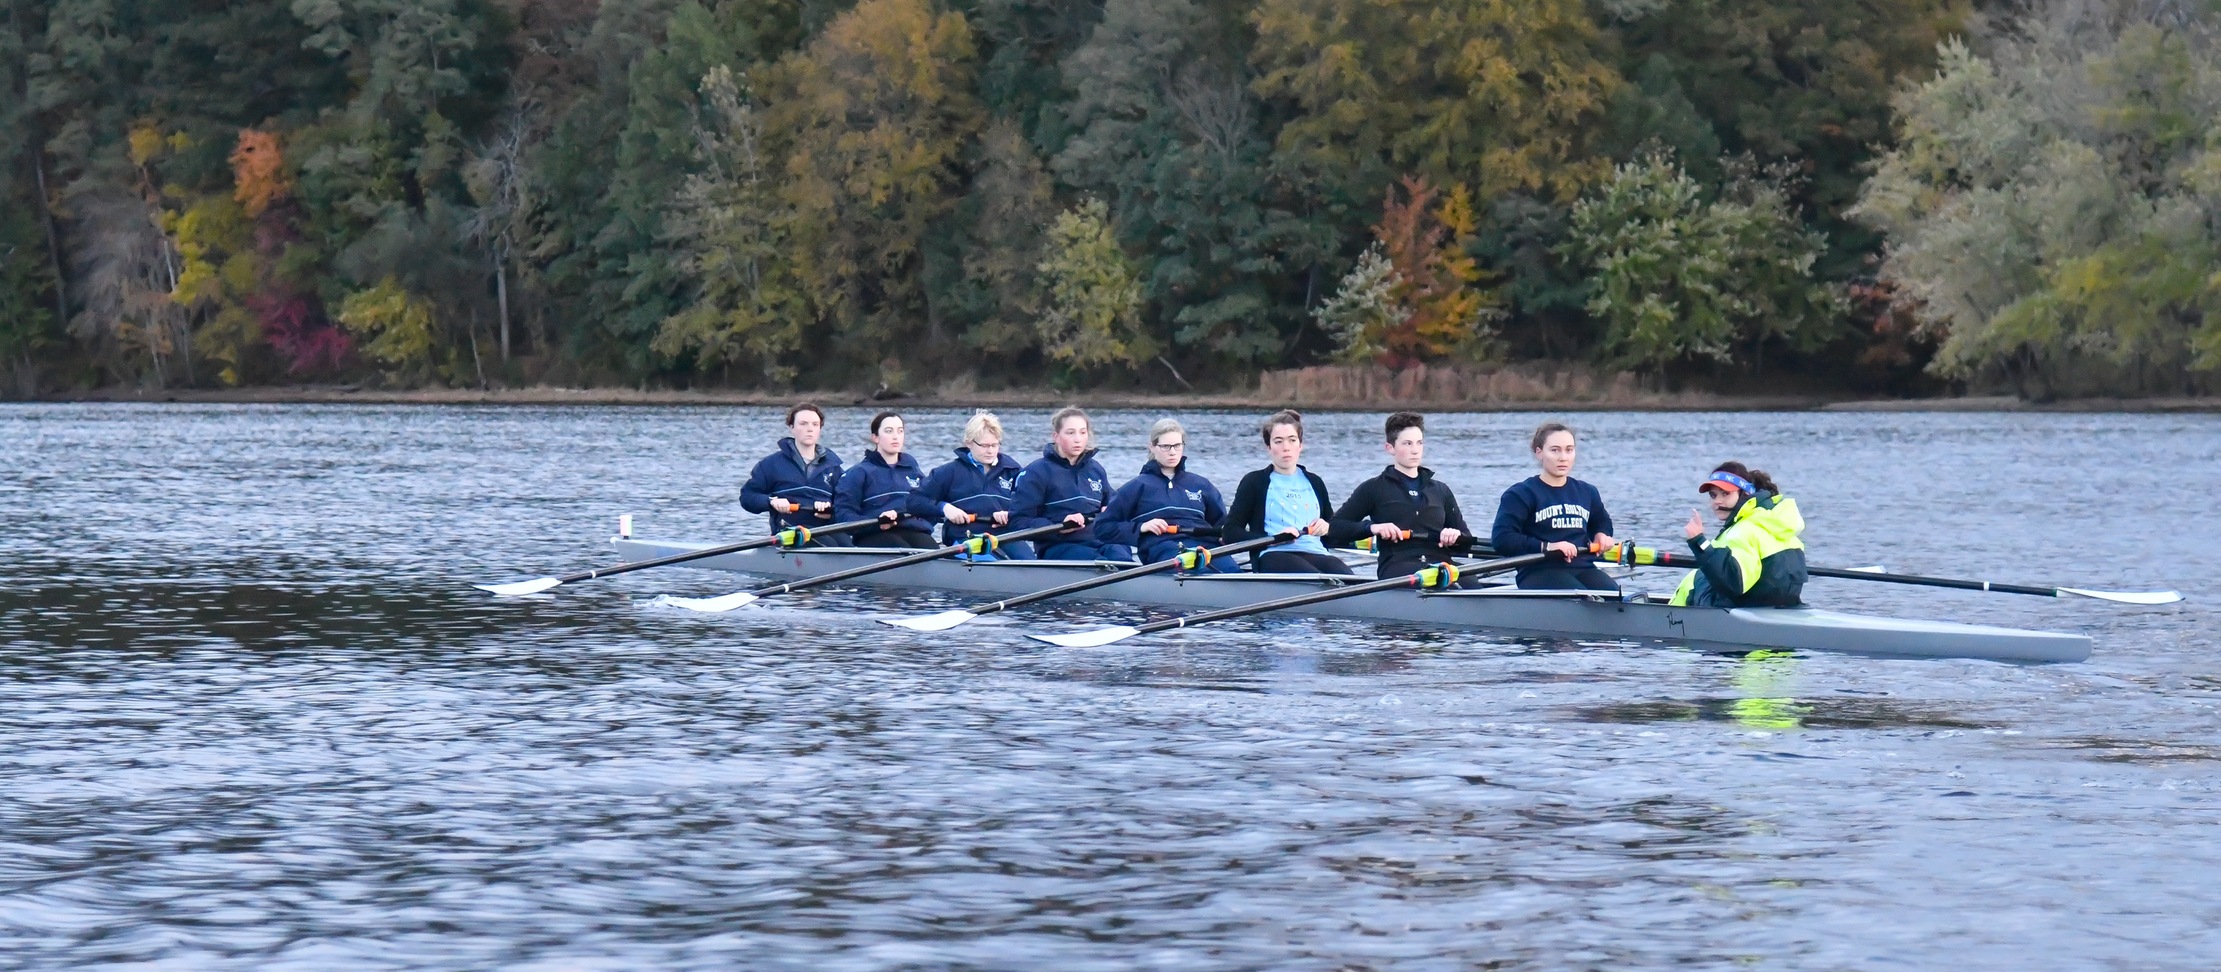 Rowing Has Impressive Showing at Head of the Riverfront